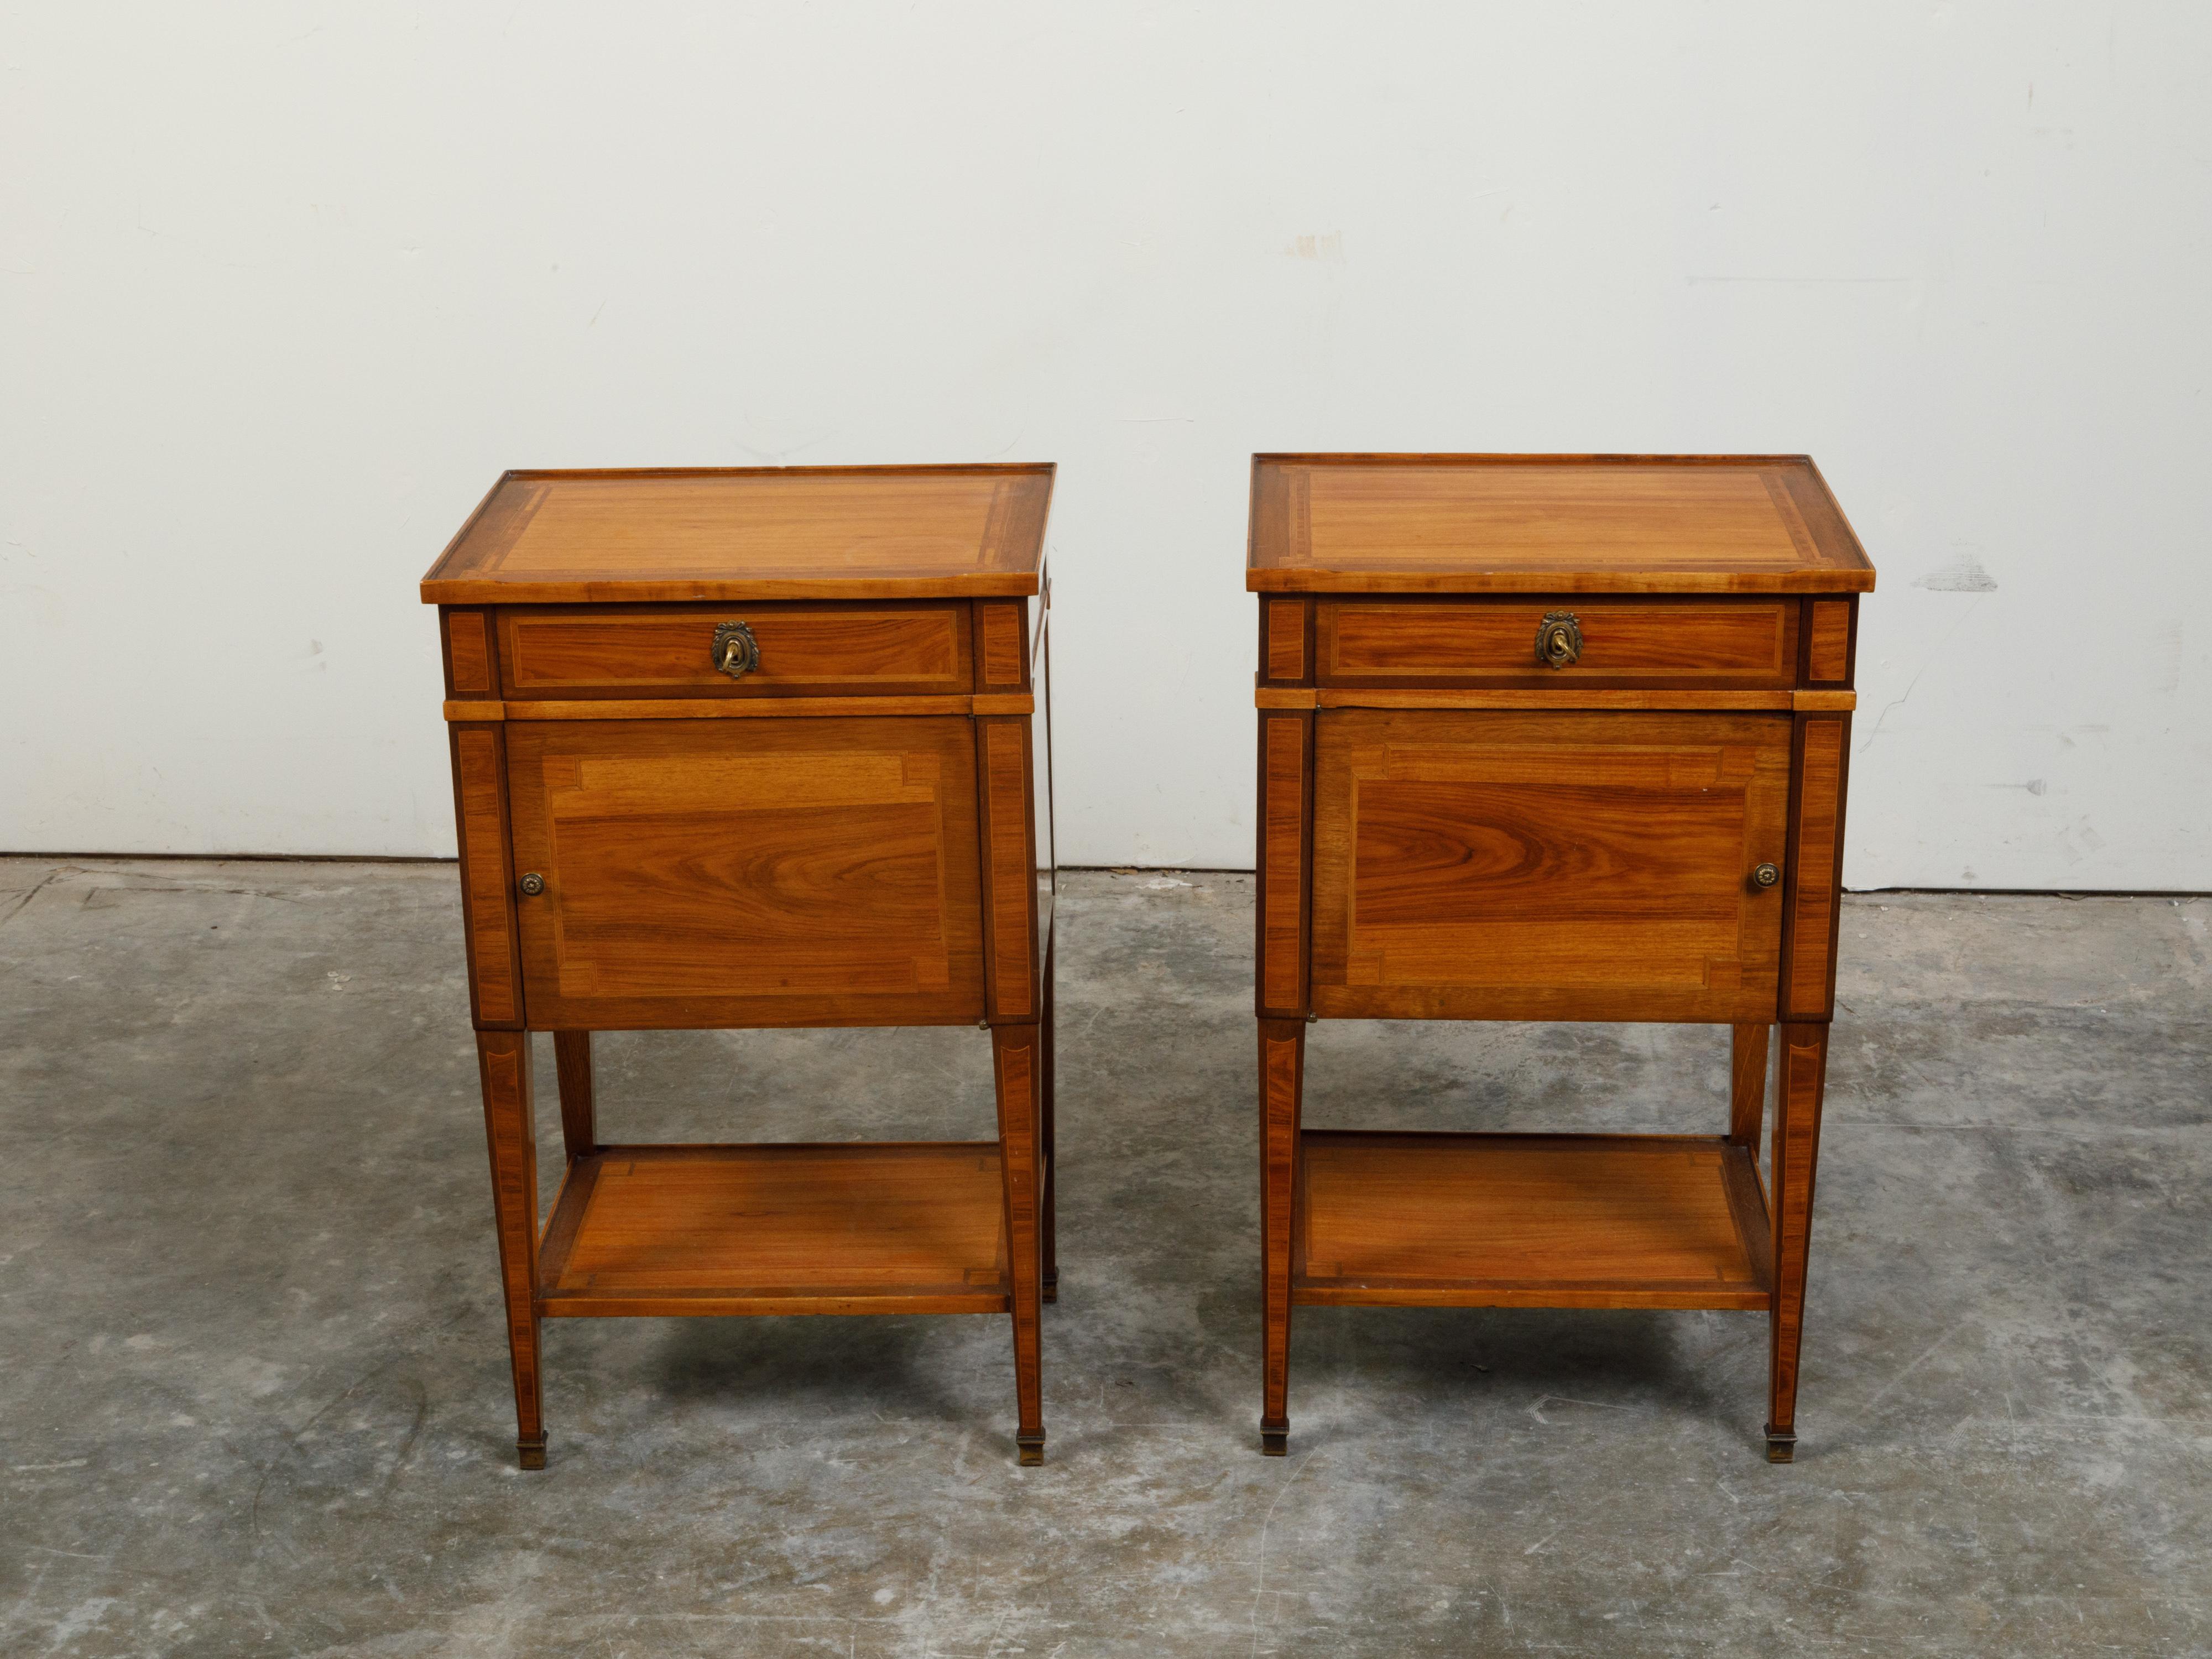 A pair of French Paul Sormani walnut bedside tables from the late 19th century, with banding. Created in France at the end of the 19th century, each of this pair of nightstands features a rectangular top with inlay, sitting above a single drawer